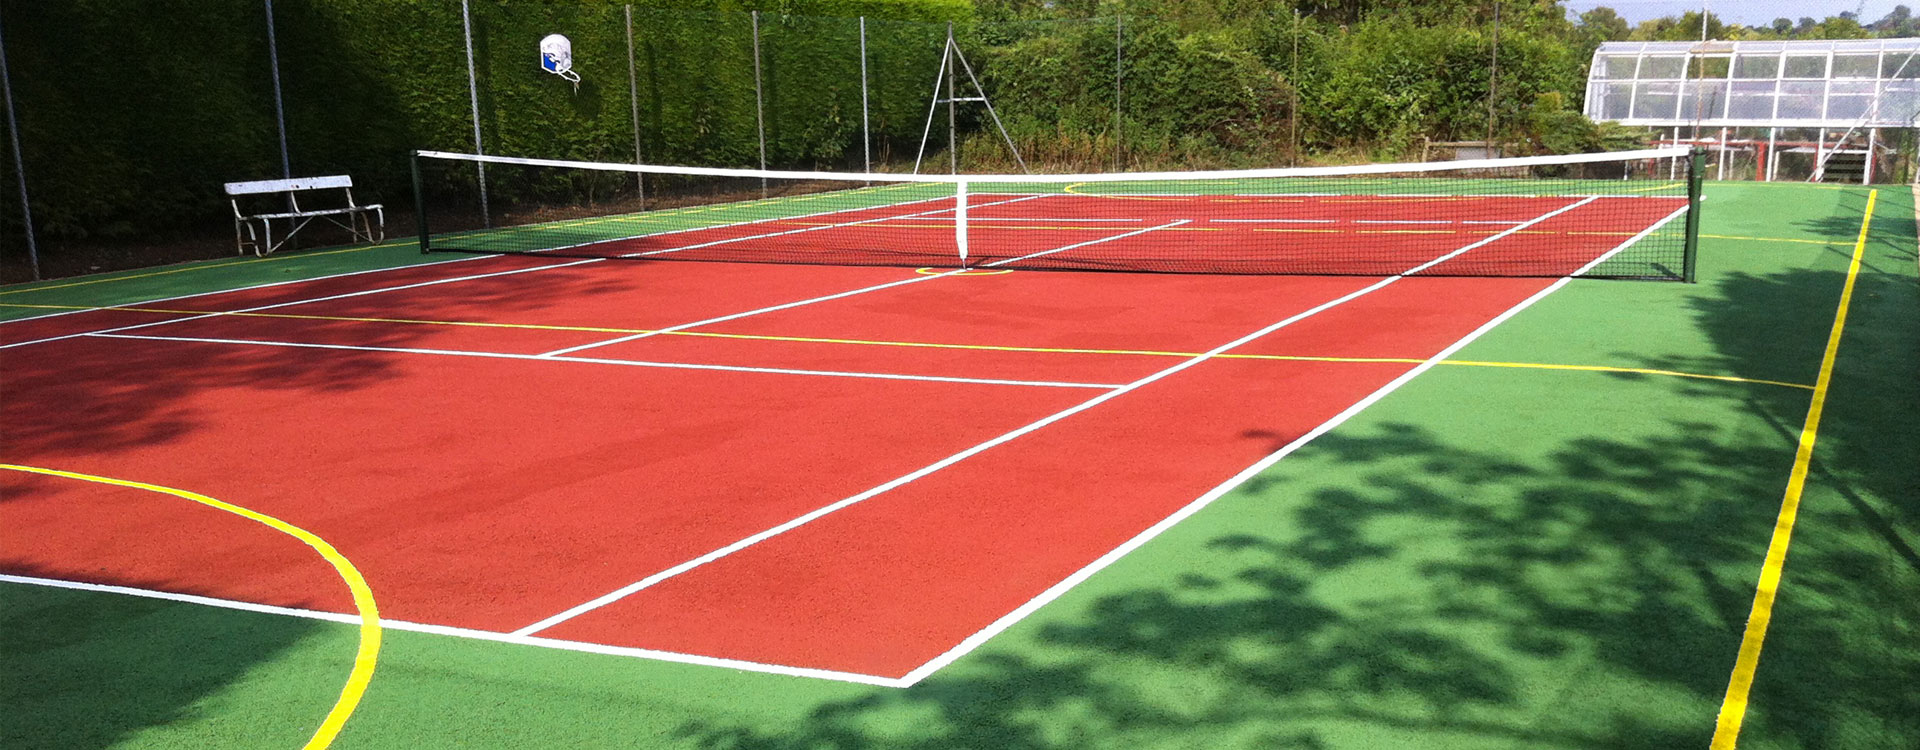 Benefits Of Artificial Clay Tennis Court Surfacing Soft Surfaces Ltd The Uk S Leading Playground Flooring